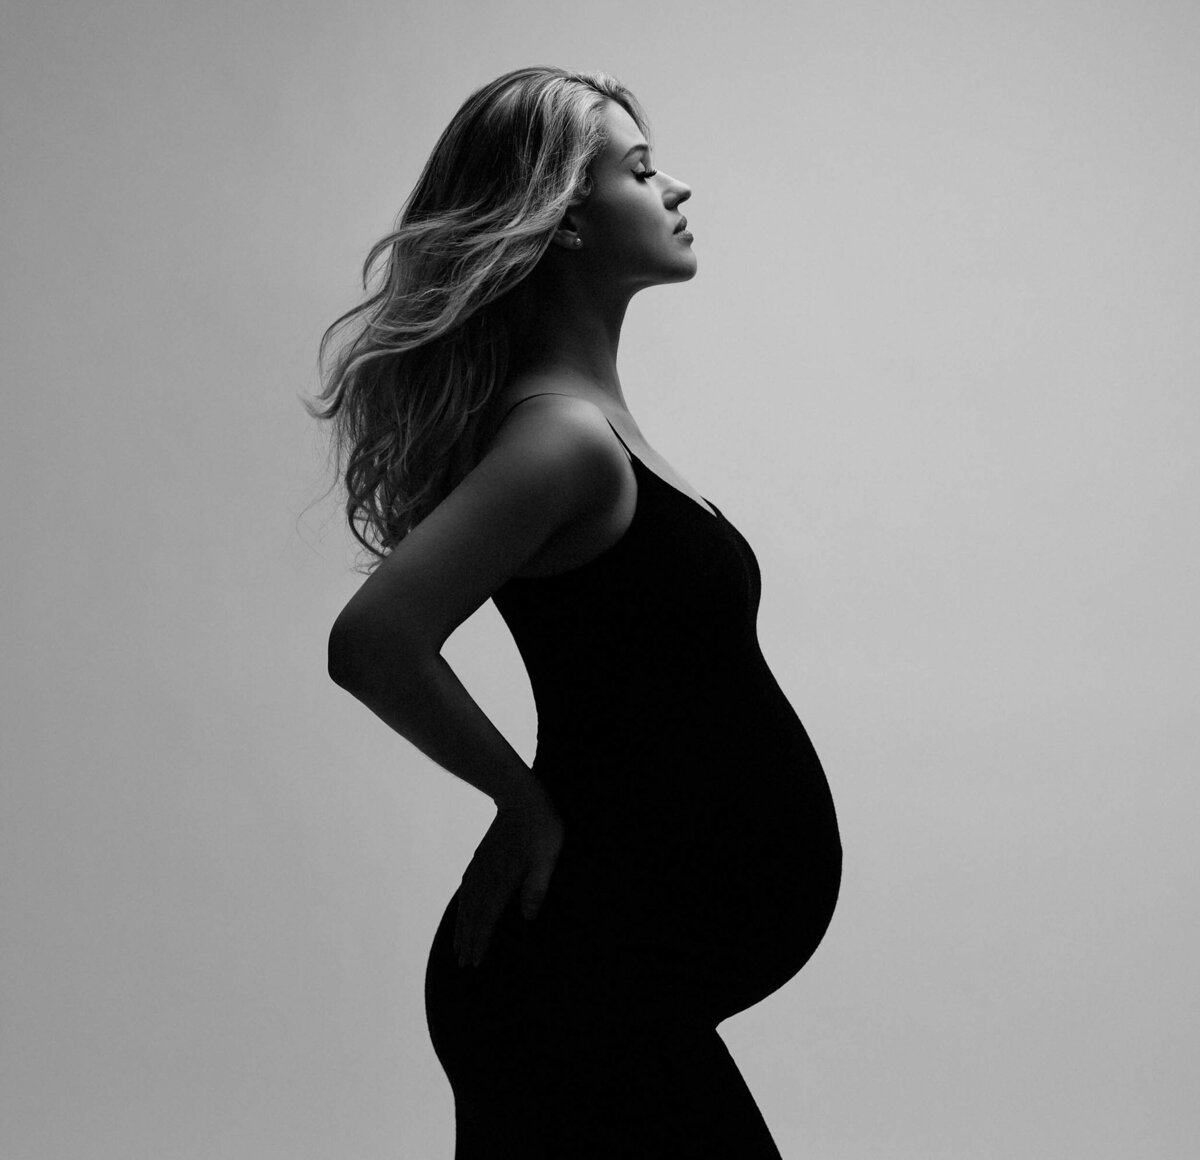 Artistic Lighting for Maternity Photography Course by Lola Melani-1-2